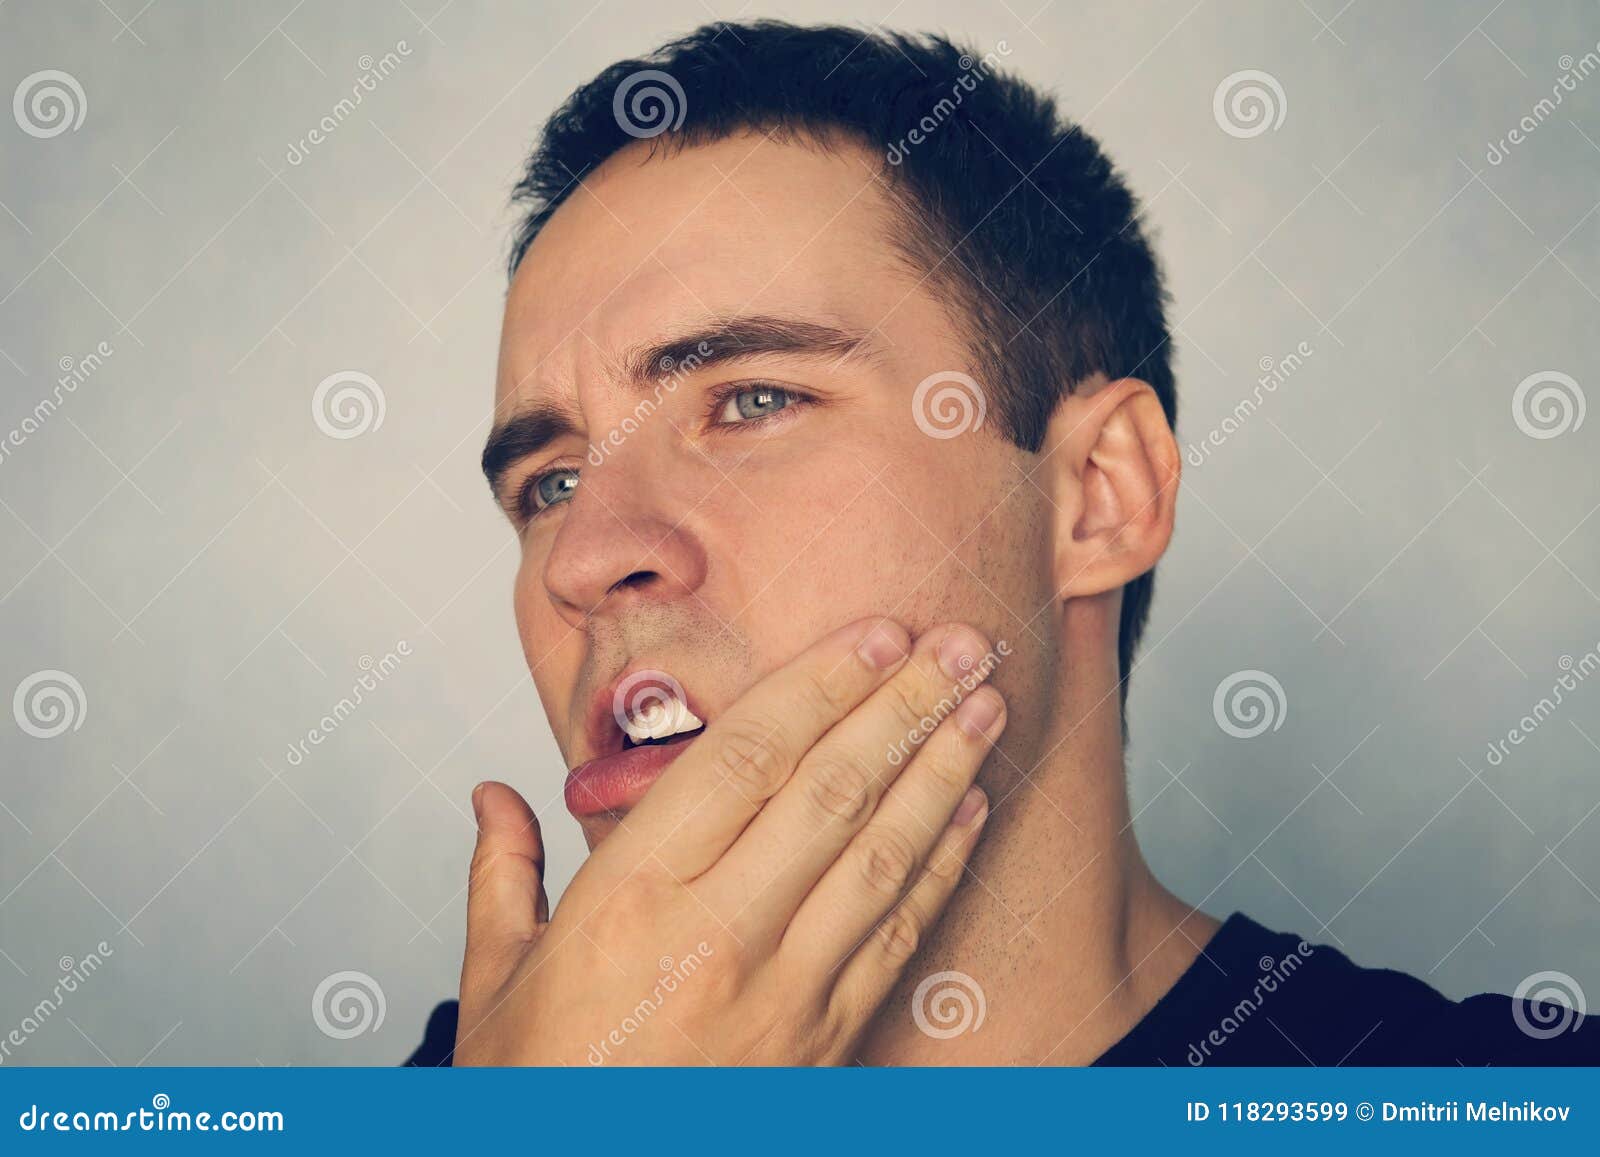 dramatic shot of a man in pain holding his jaw. toothache. a punch in the jaw slap. insult. the guy strokes his chin after shaving